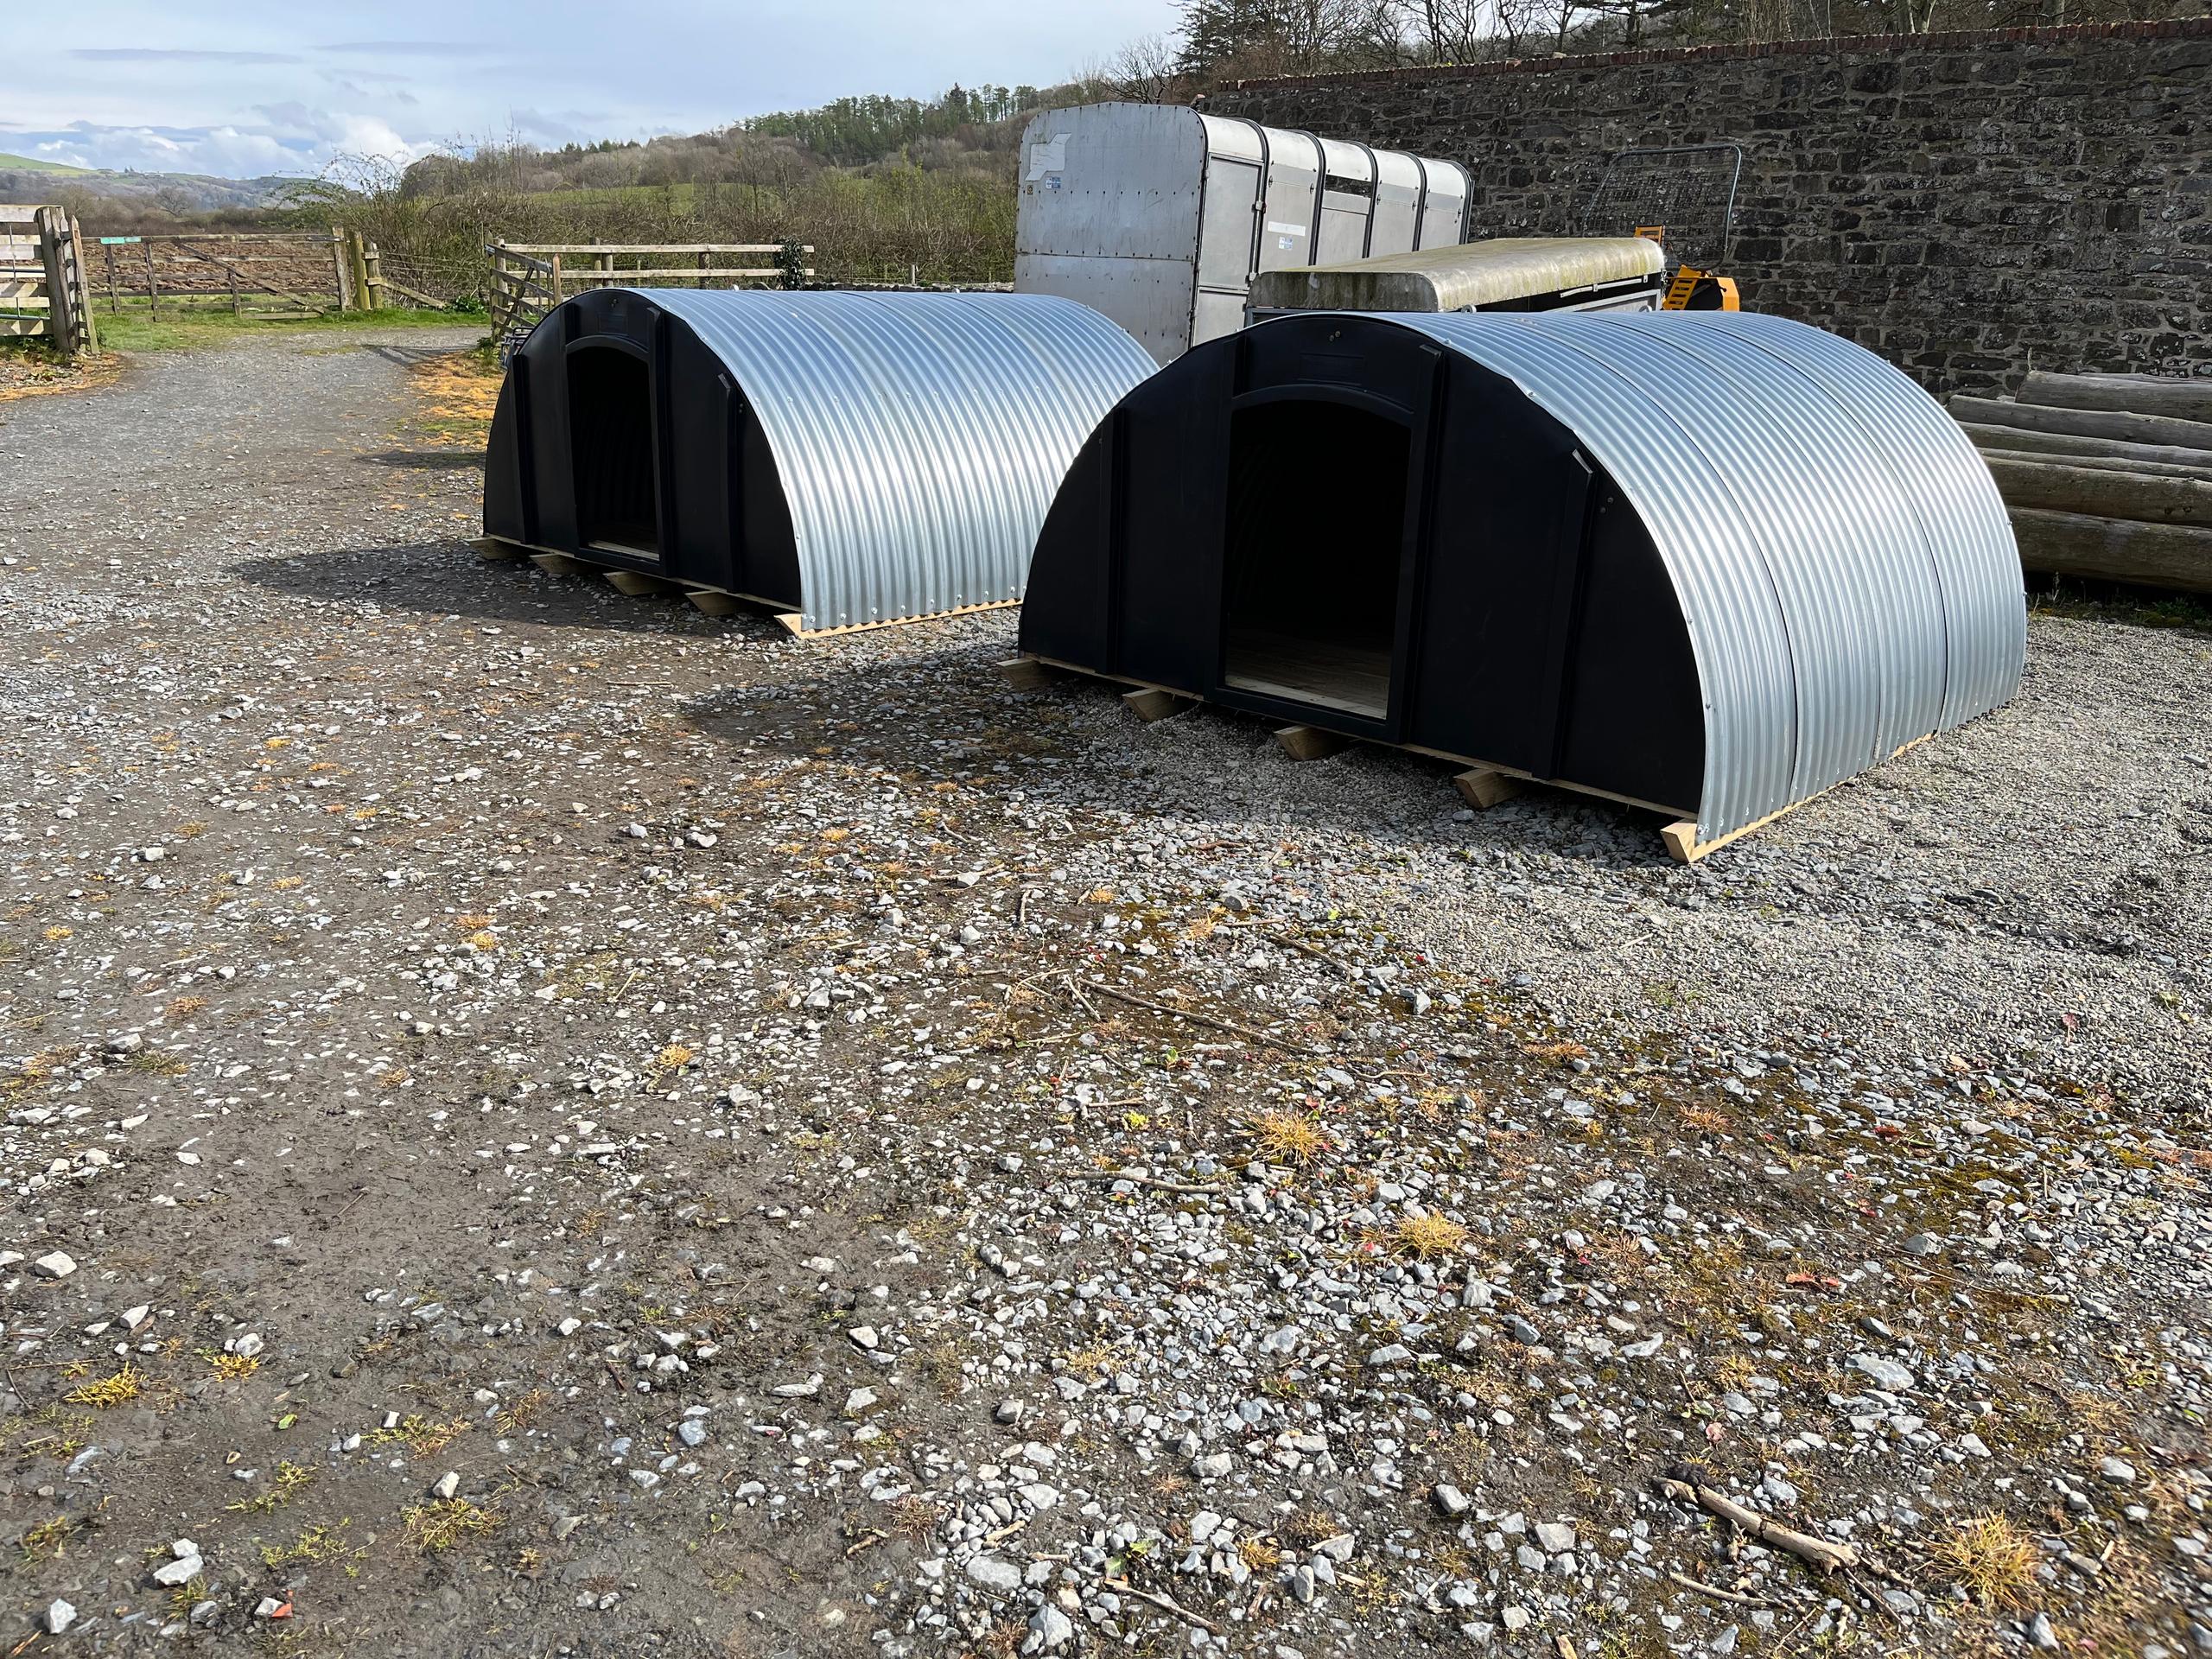 Two arks delivered and assembled to the National Trust in Lampeter, West Wales for their Welsh pigs.